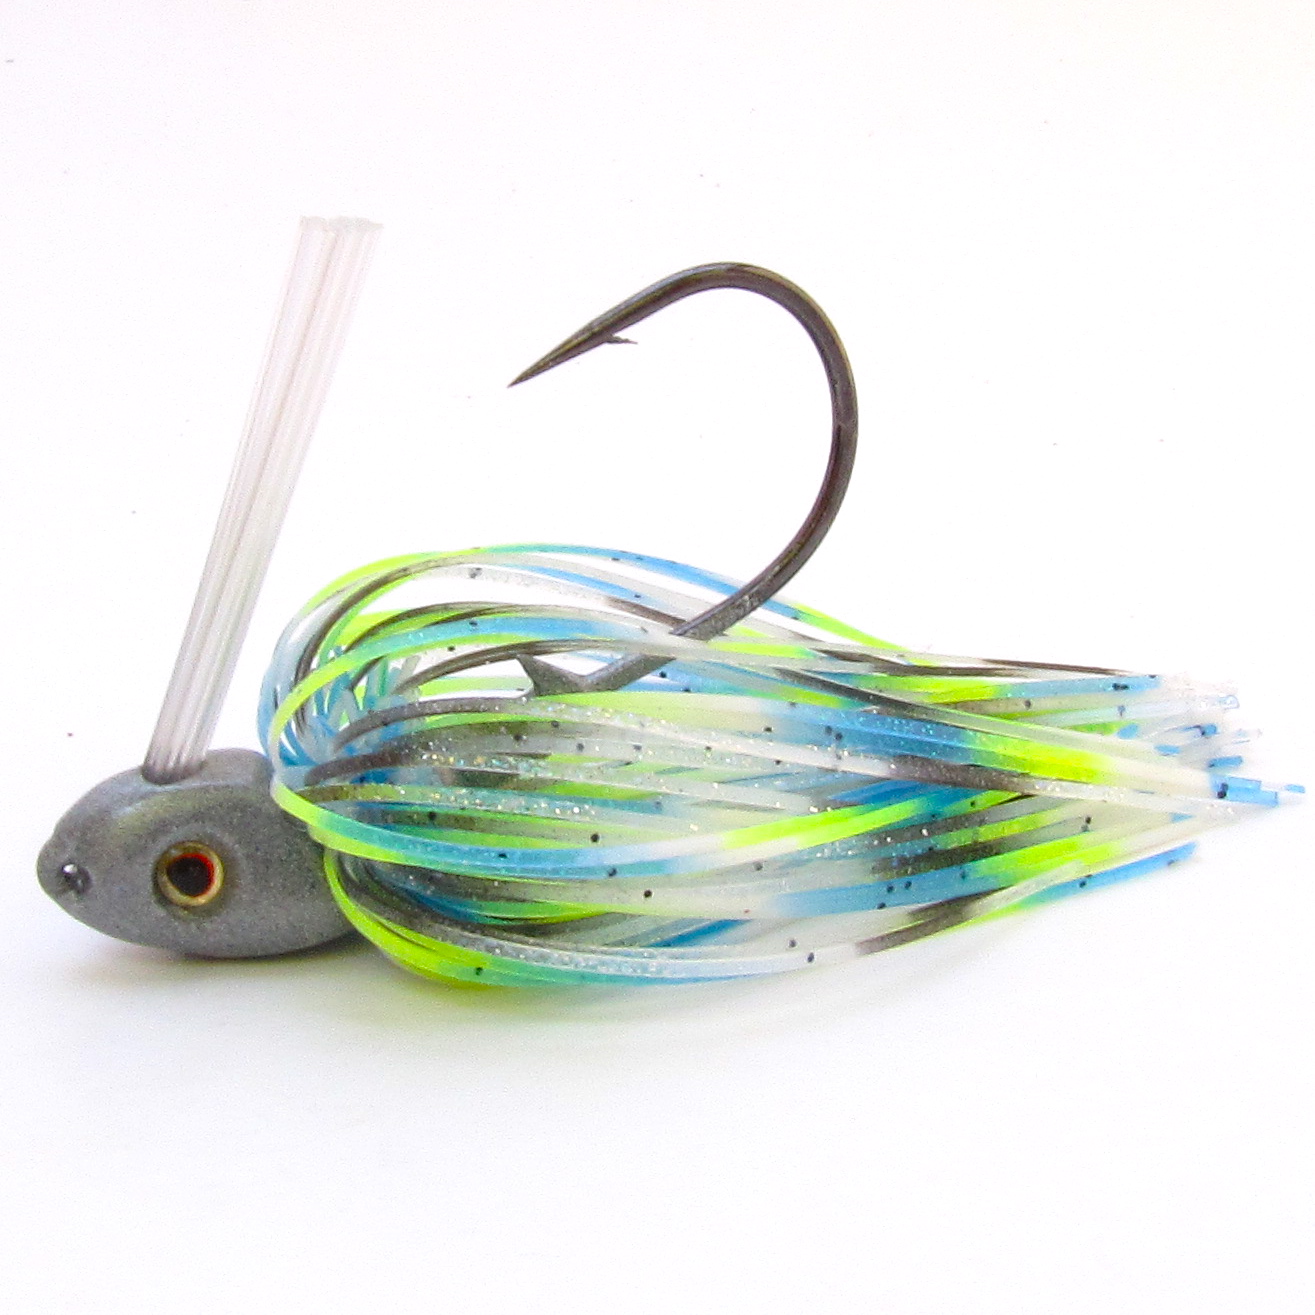 These will be a natural in the water - Fishing Frugal Lures